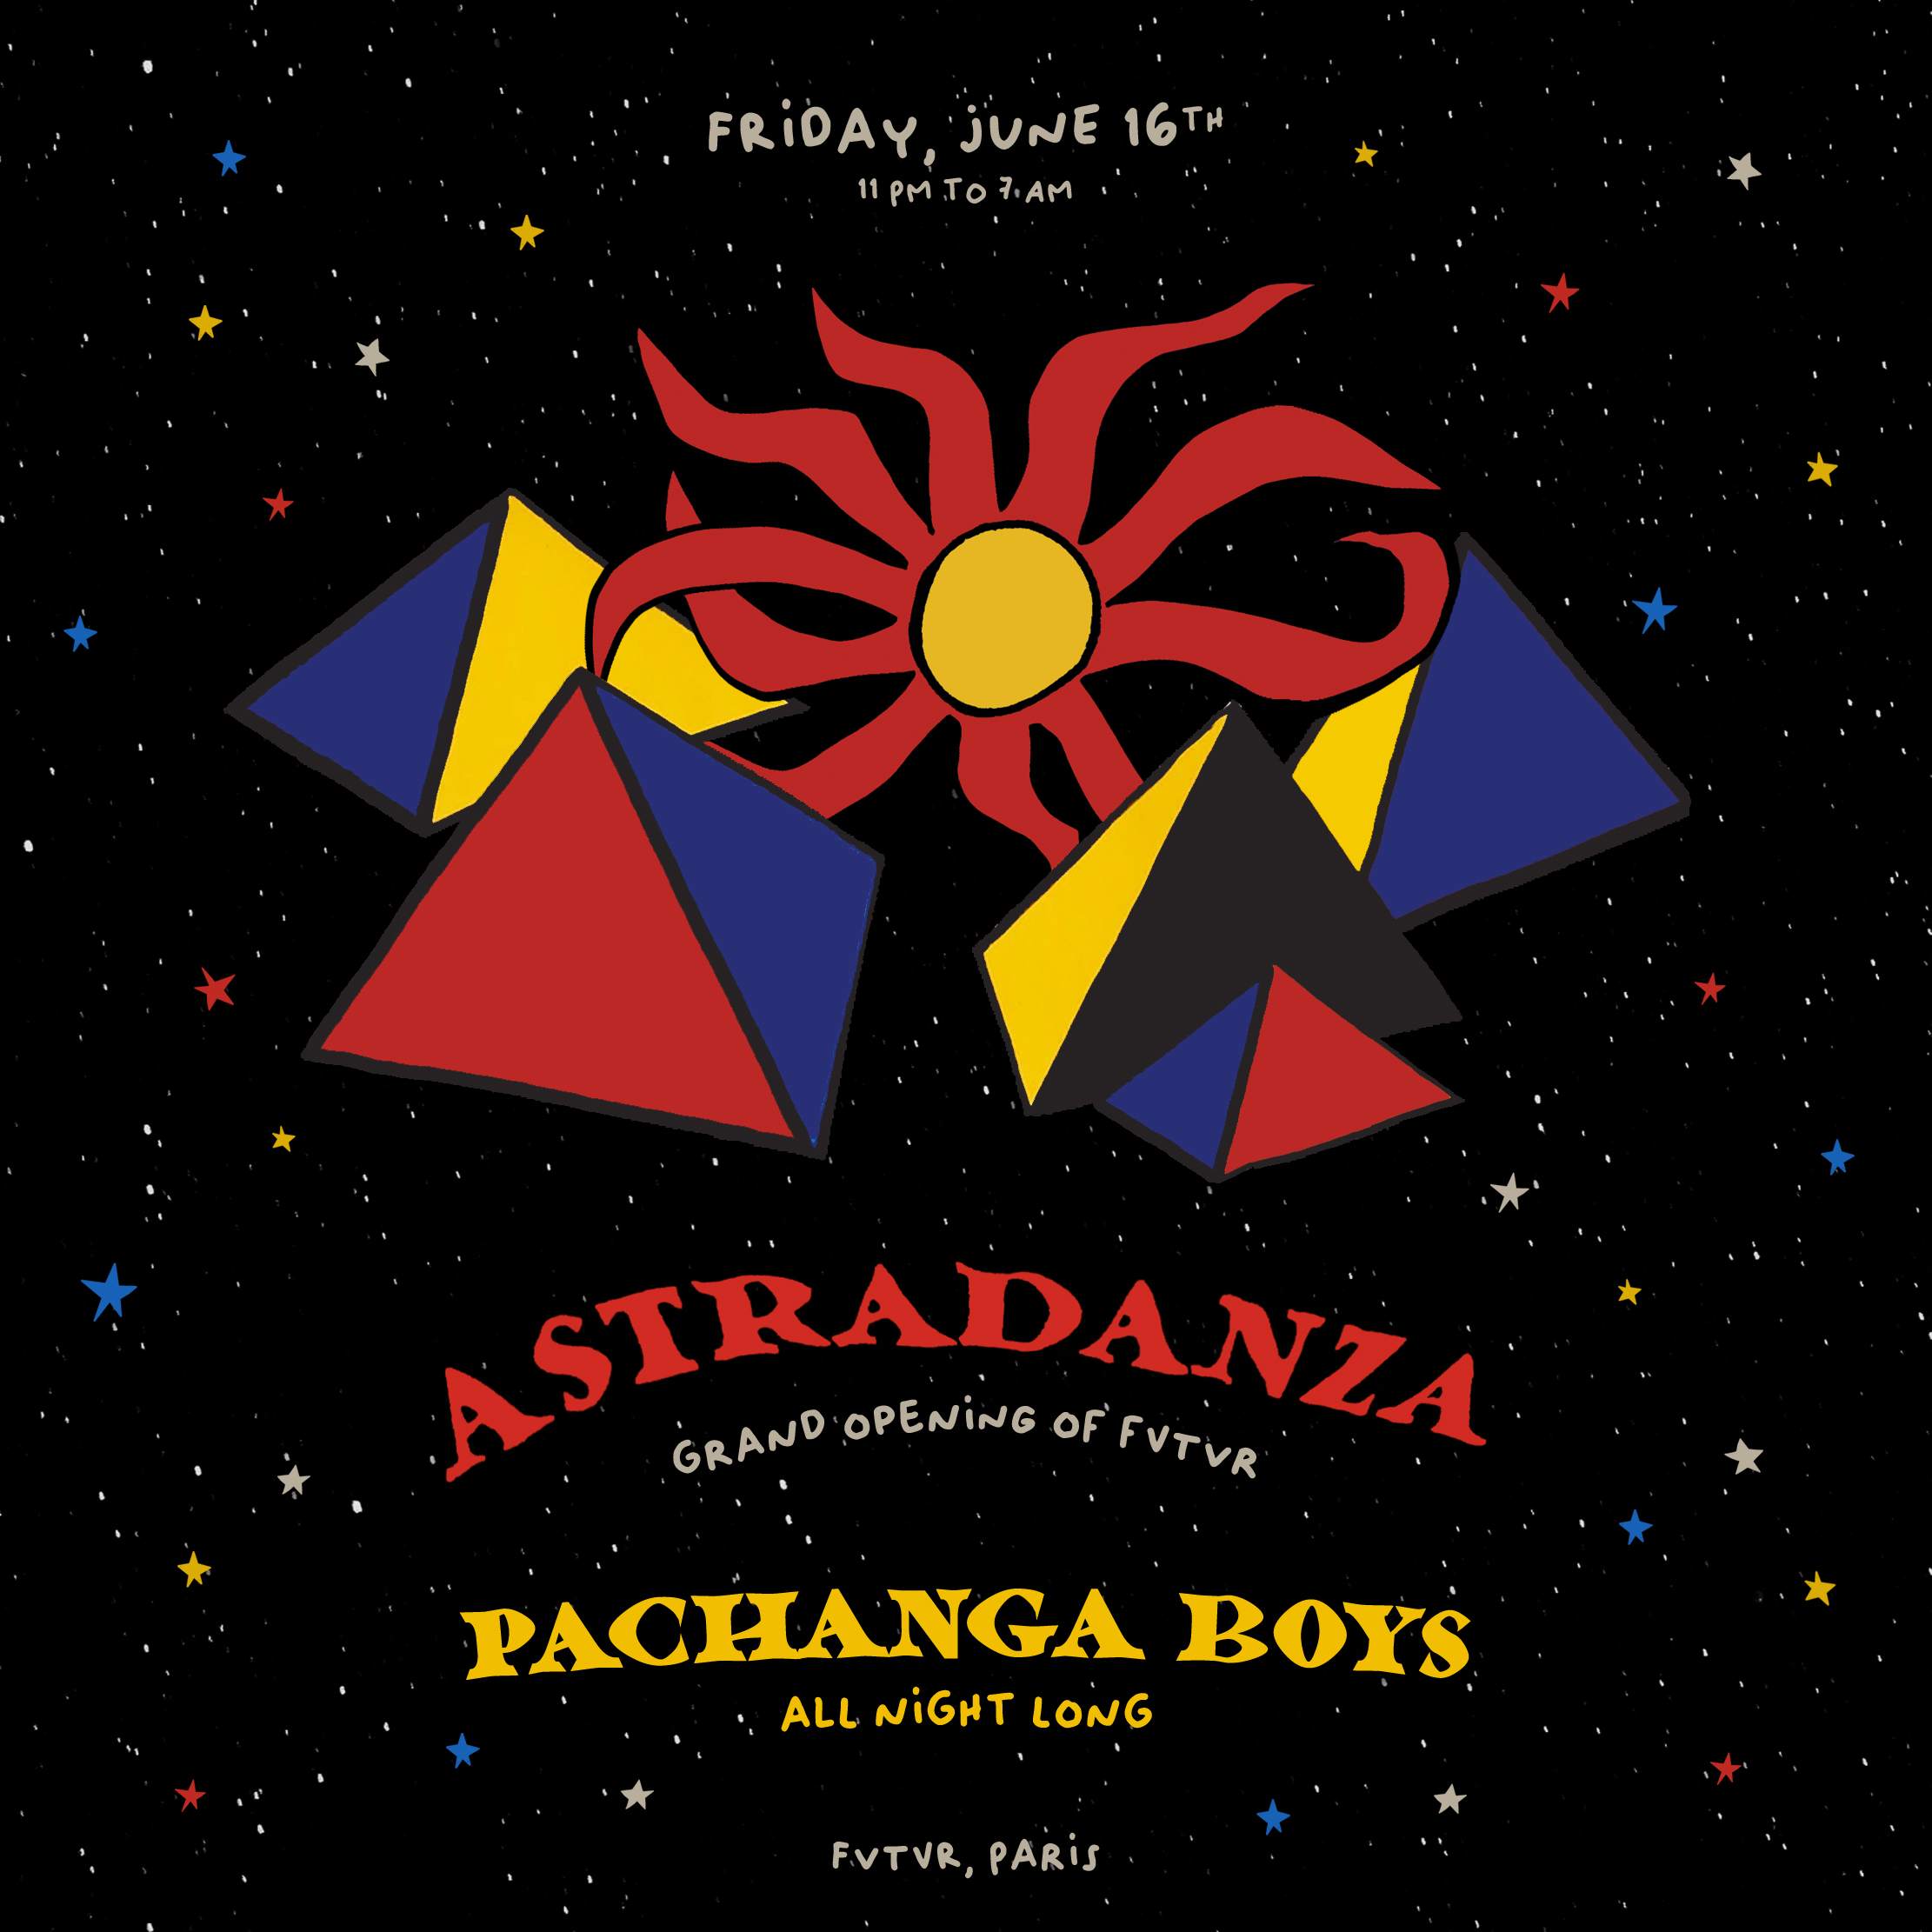 Fvtvr Grand Opening with Pachanga Boys - フライヤー表